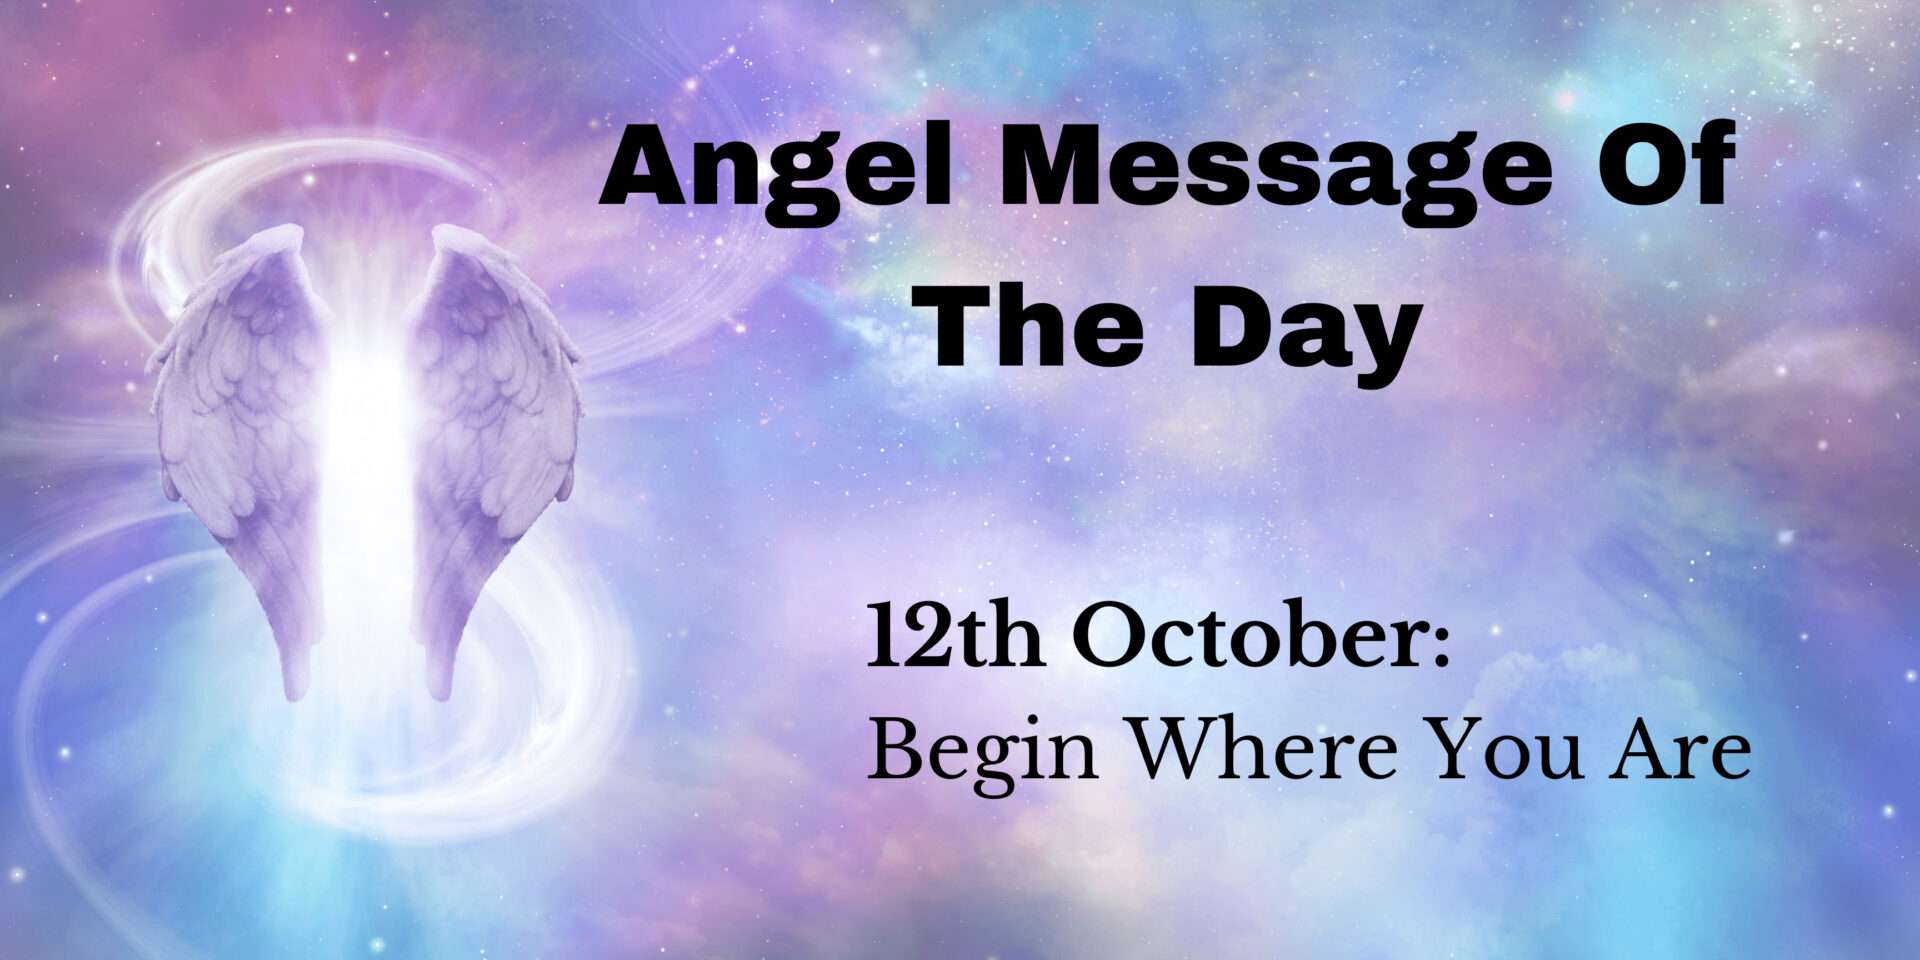 angel message of the day : begin where you are